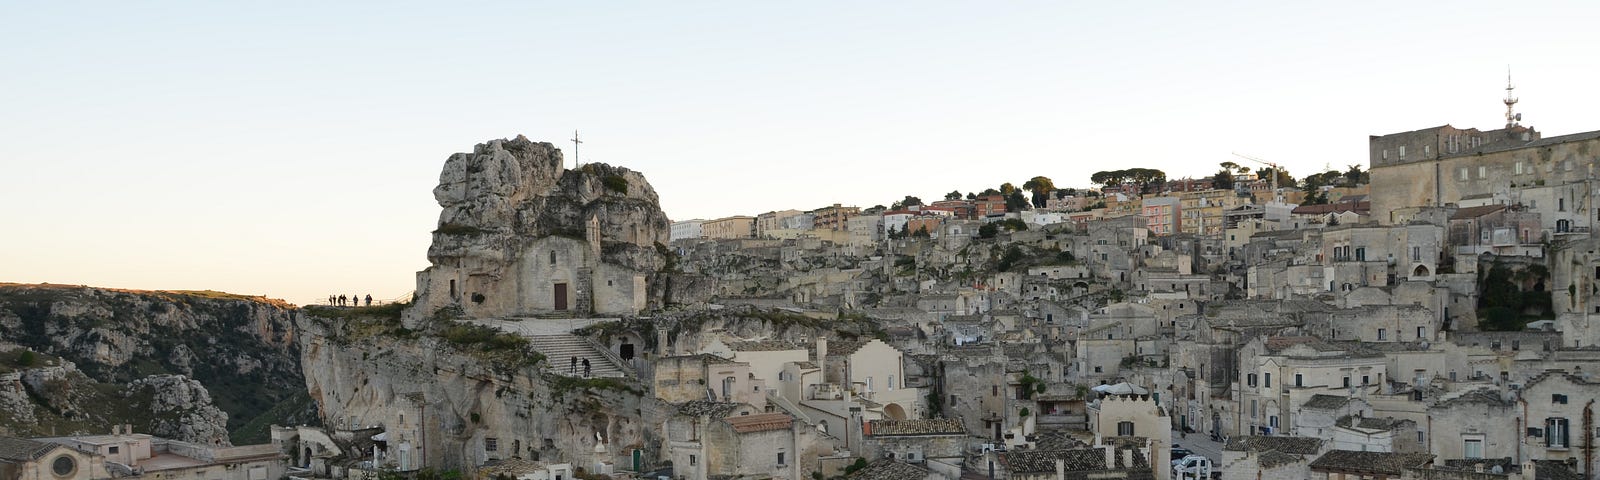 A hillside is covered with stone buildings of various heights especially on the left side of the photo — many have arched windows. On the right side, there is a courtyard in front of a building.